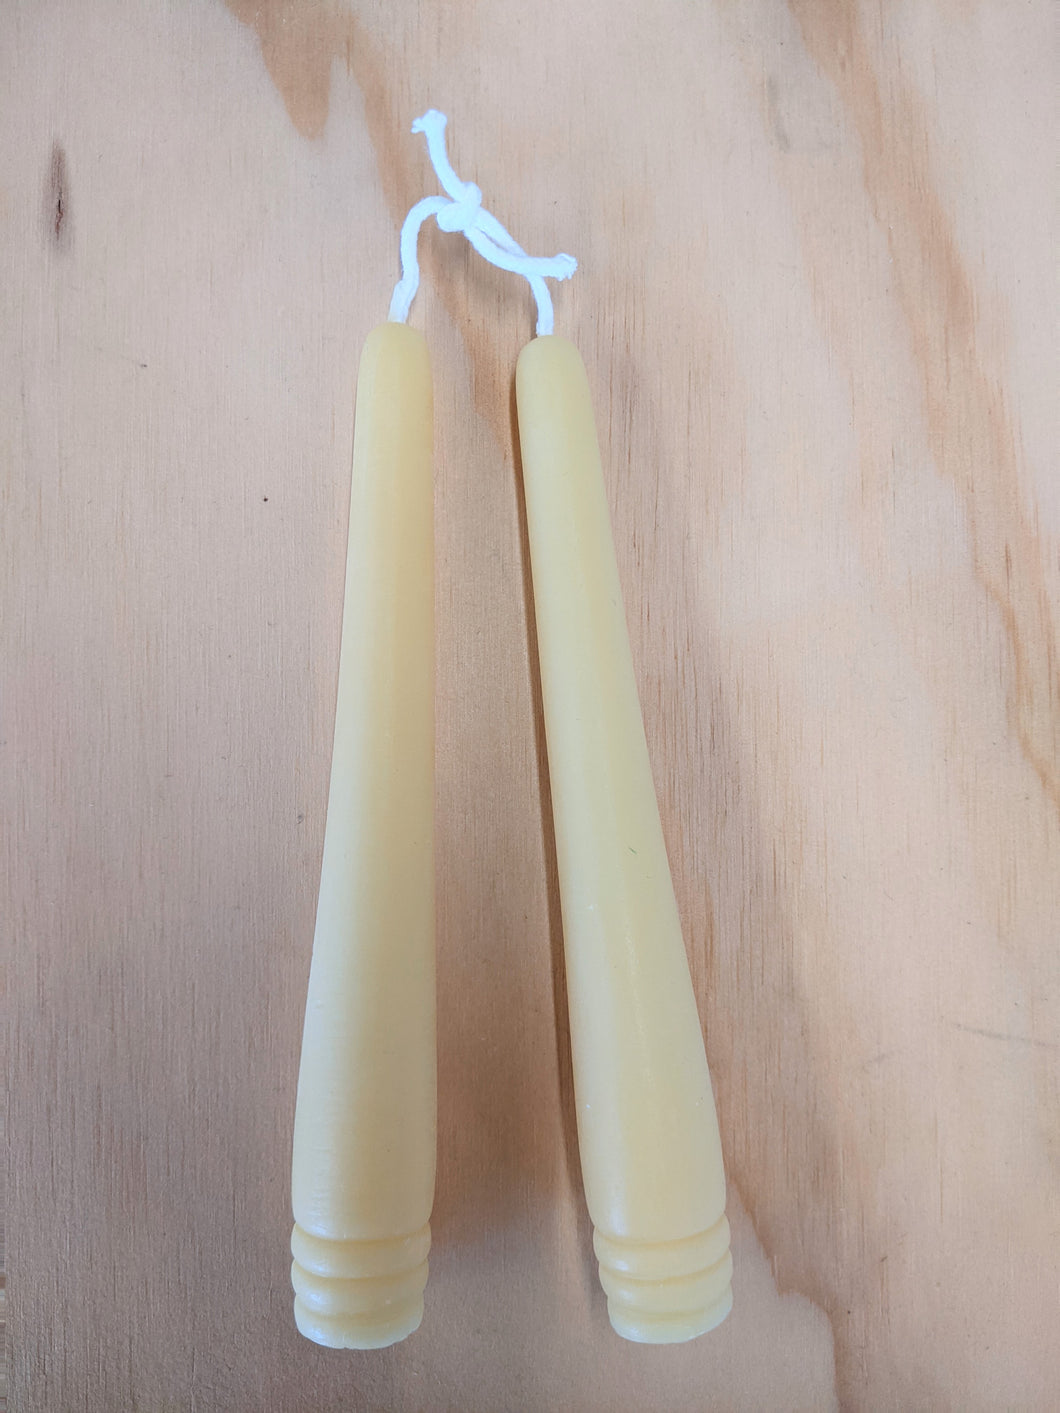 Candle, Beeswax, Set of 2